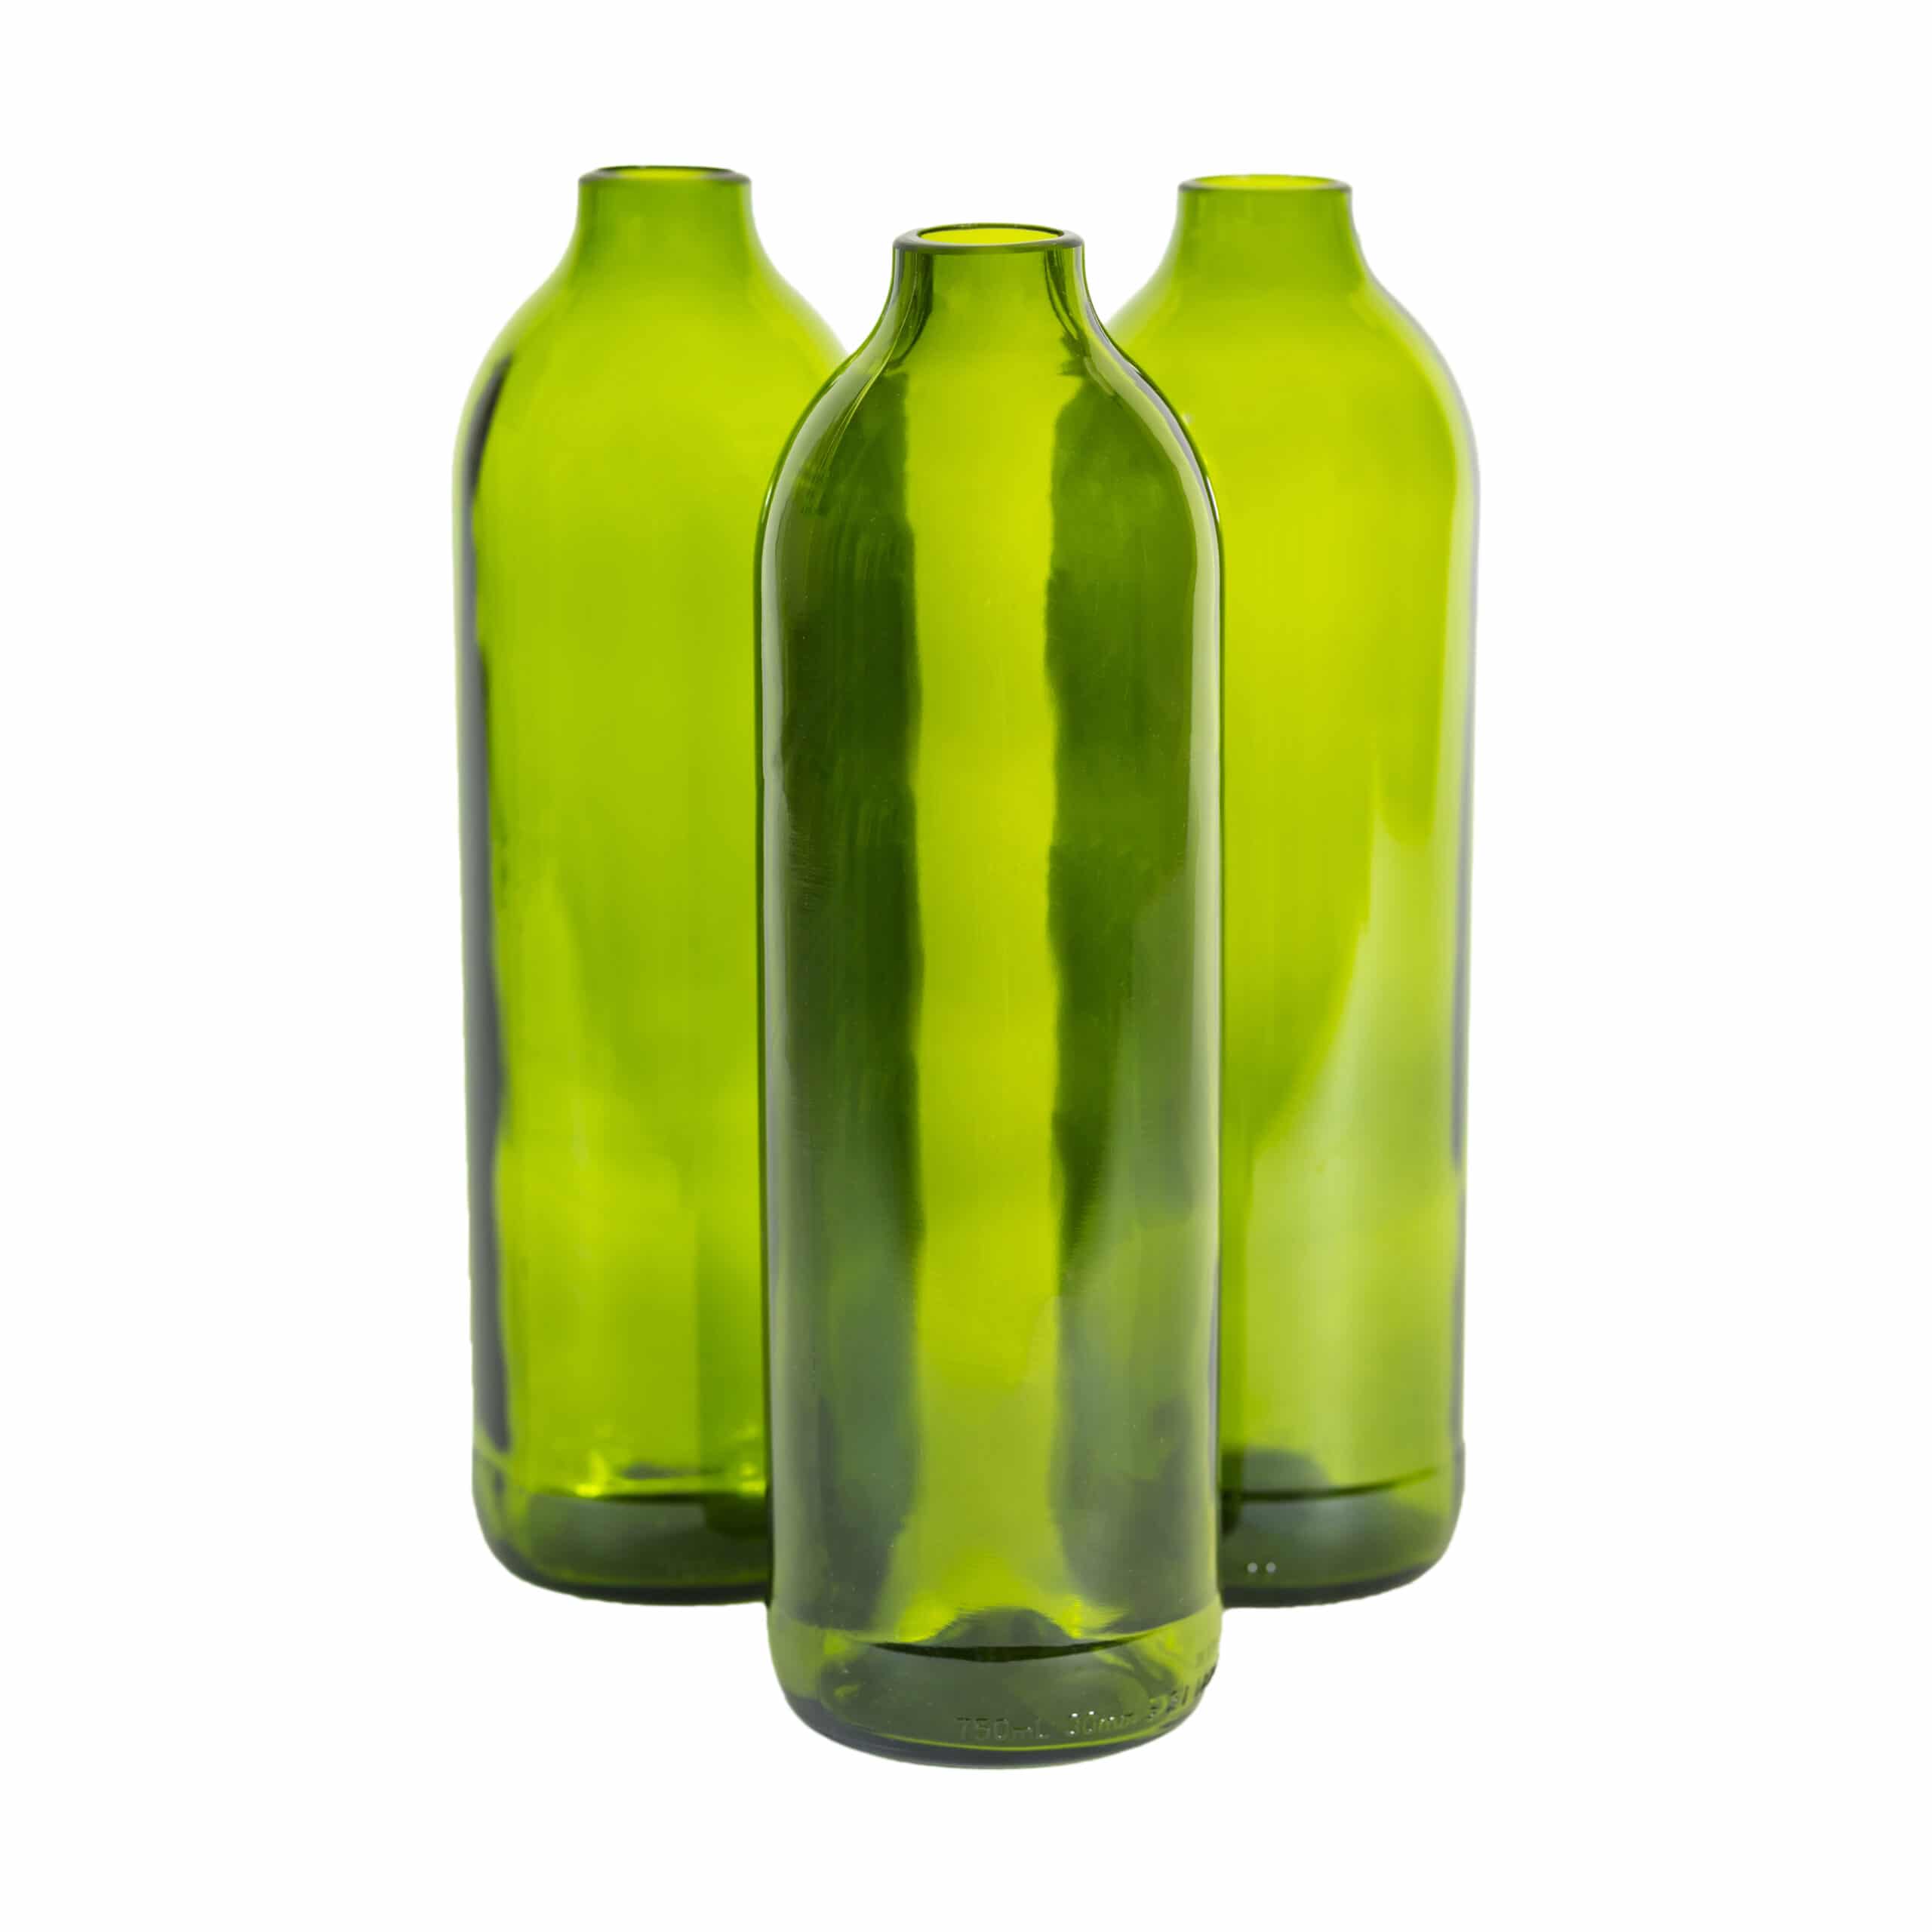 Recycled green glass Vase 